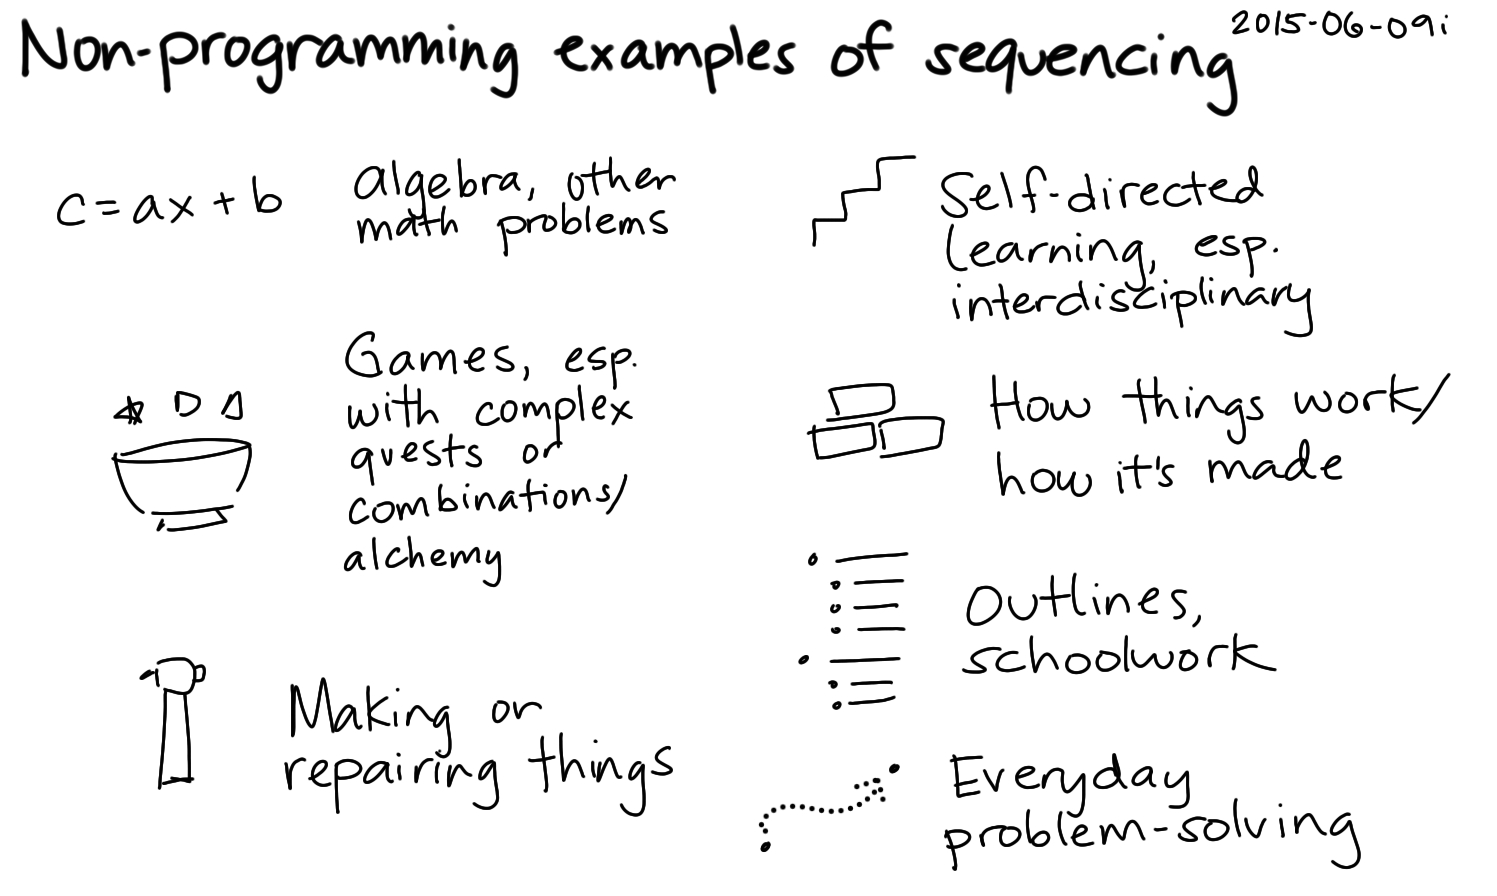 2015-06-09i Non-programming examples of sequencing -- index card #learning #problem-solving #sequencing.png